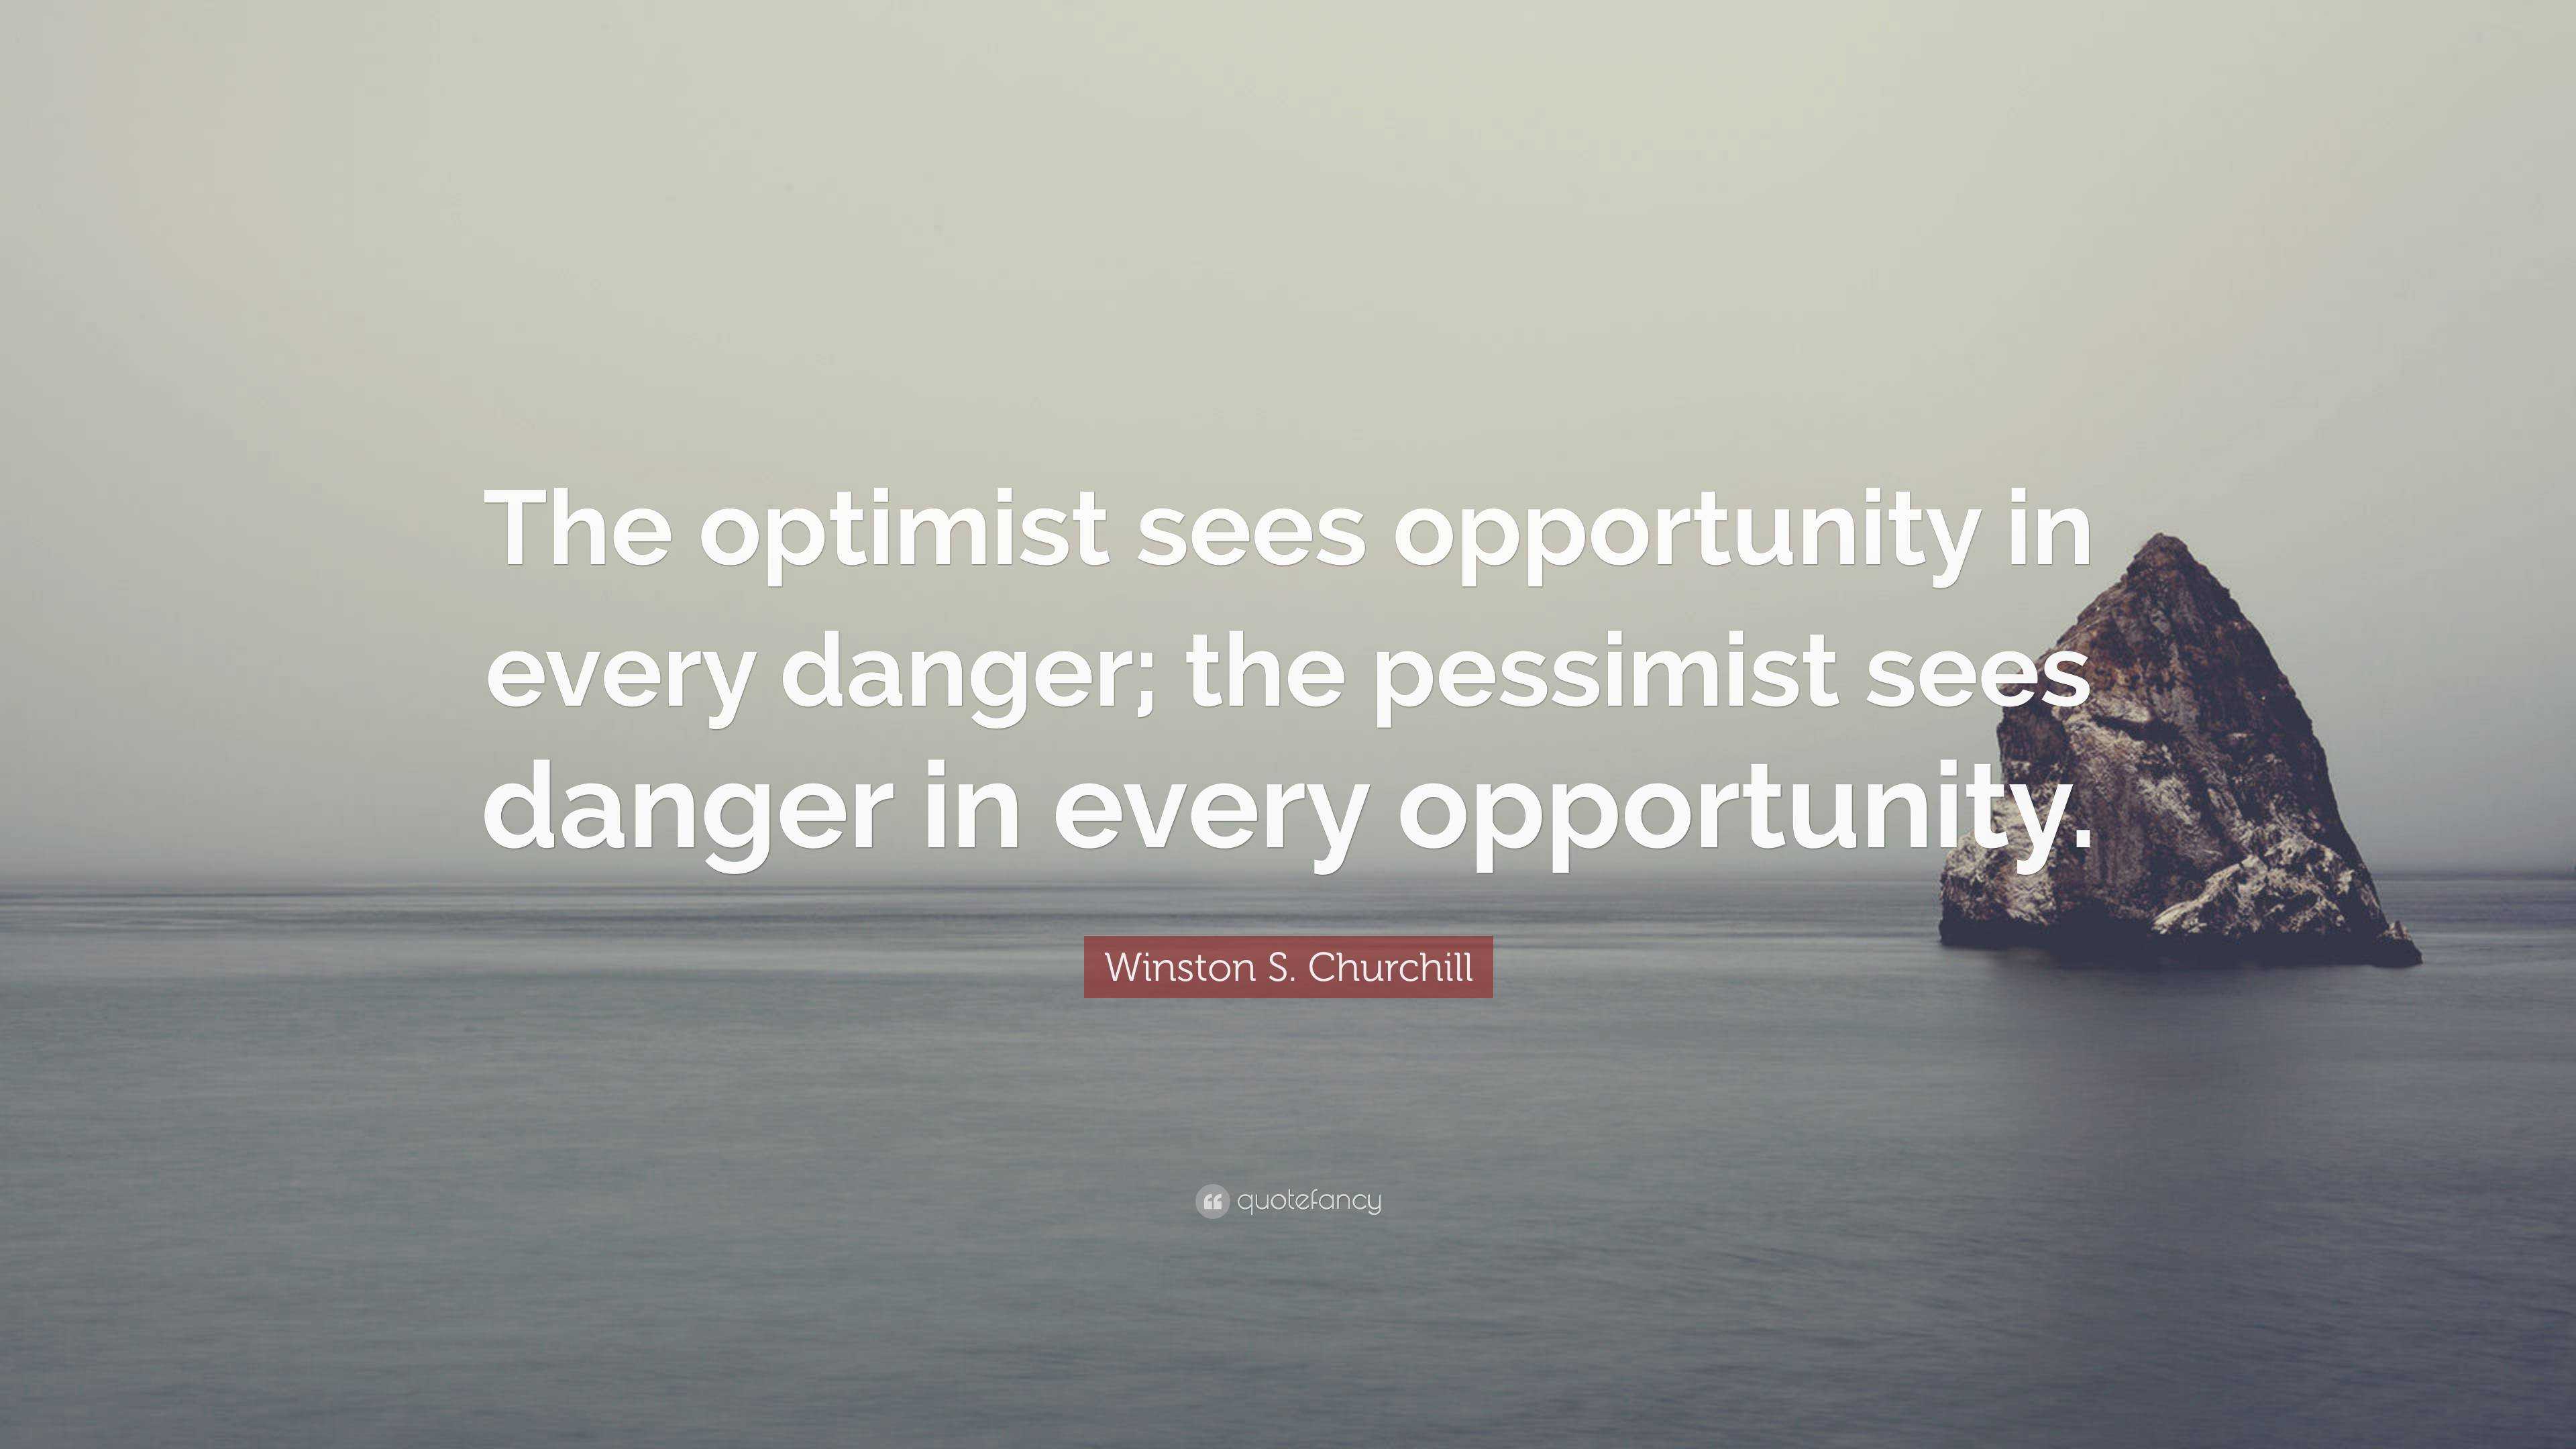 Winston S. Churchill Quote: “The optimist sees opportunity in every ...